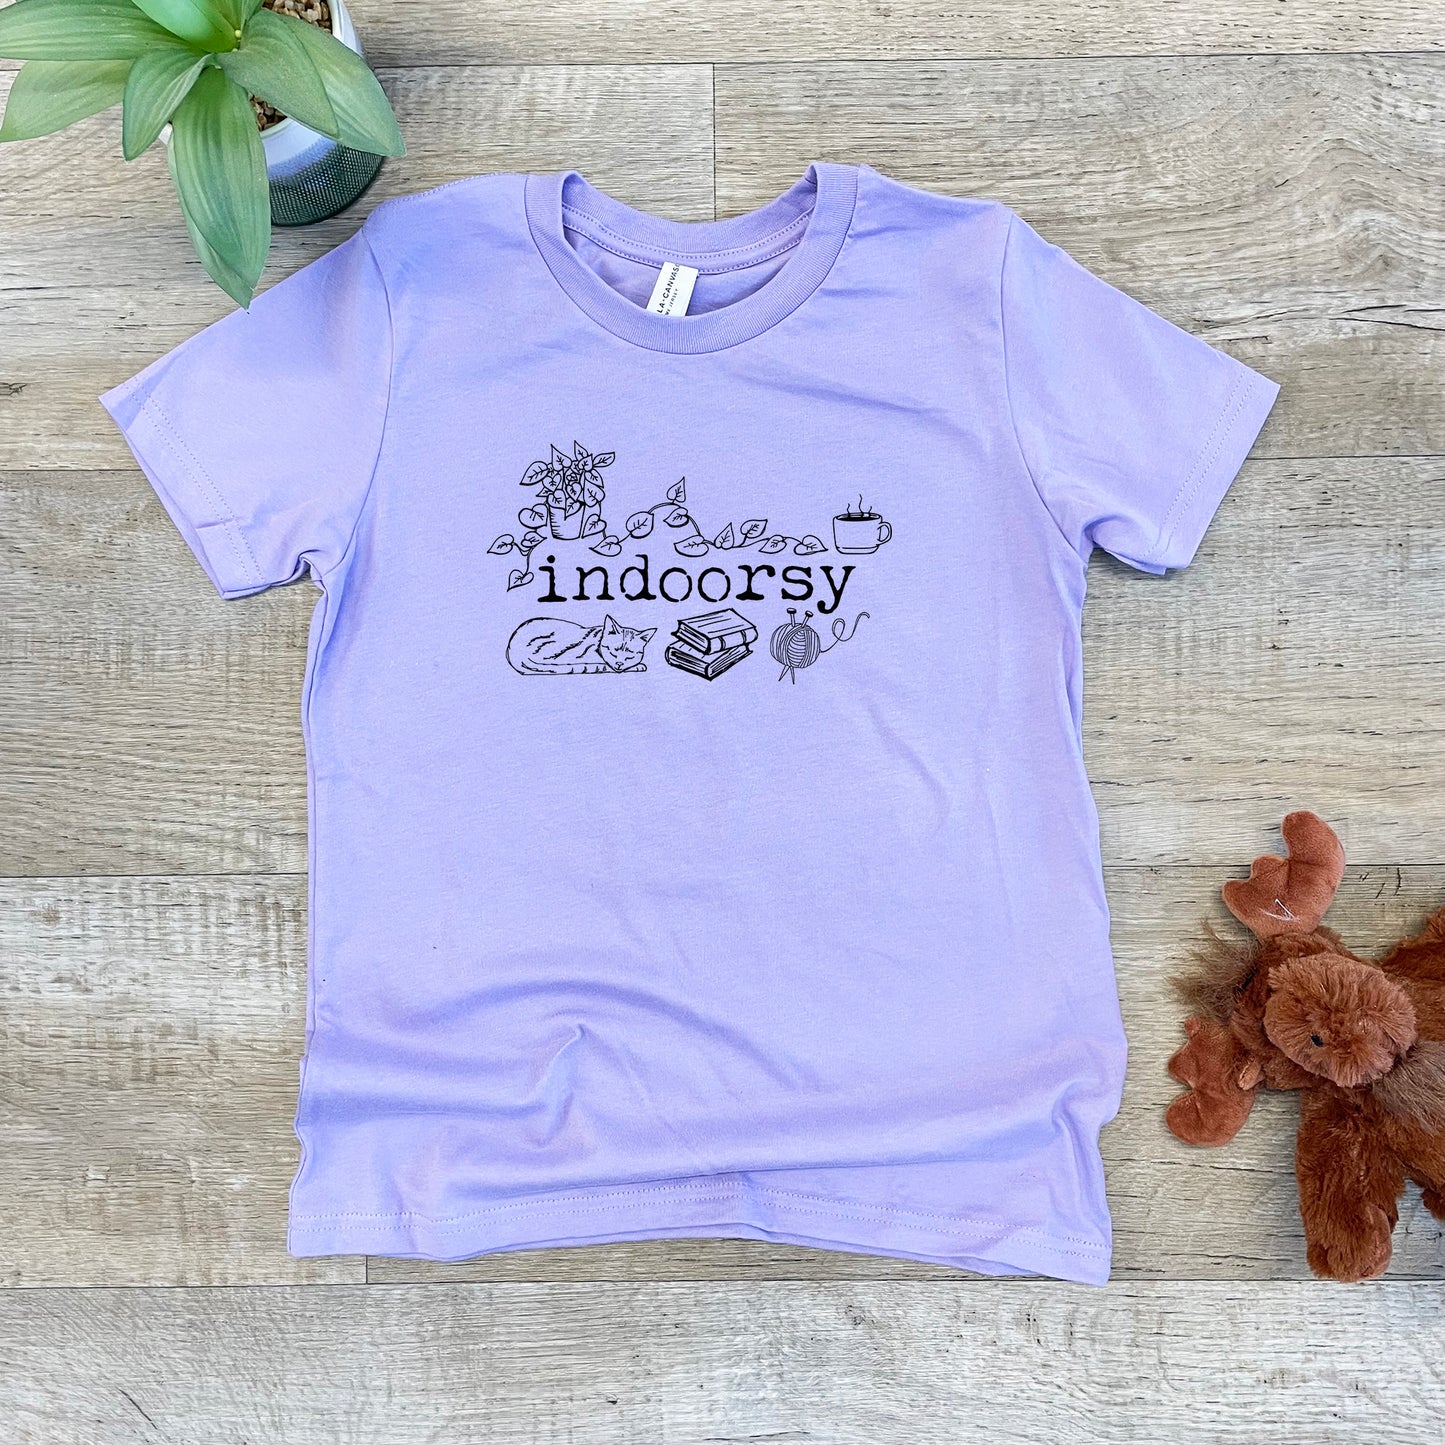 Indoorsy (Introverts, Cat) - Kid's Tee - Columbia Blue or Lavender